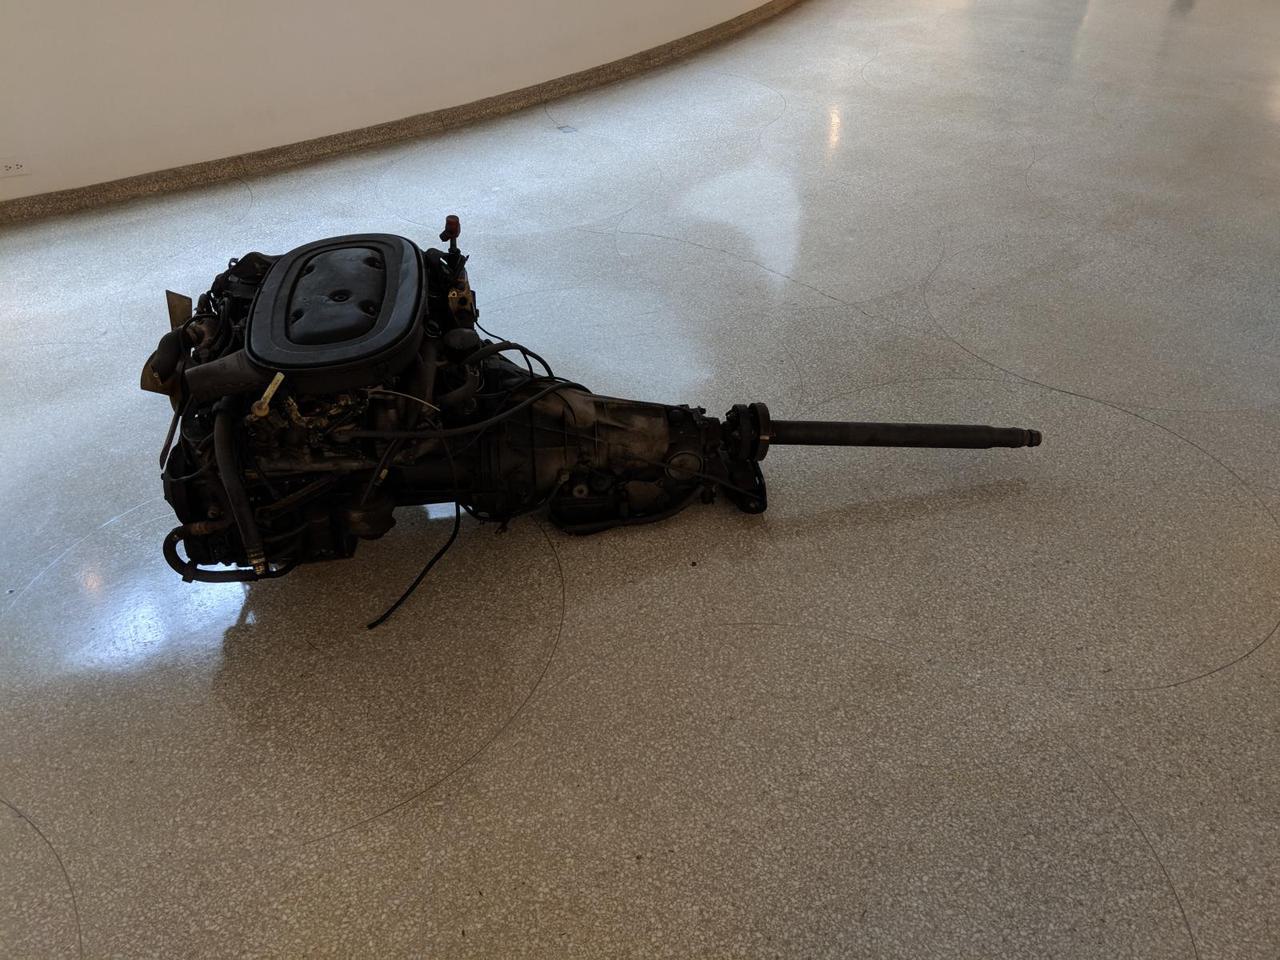 Filthy car engine that has been dumped in the middle of the museum floor.